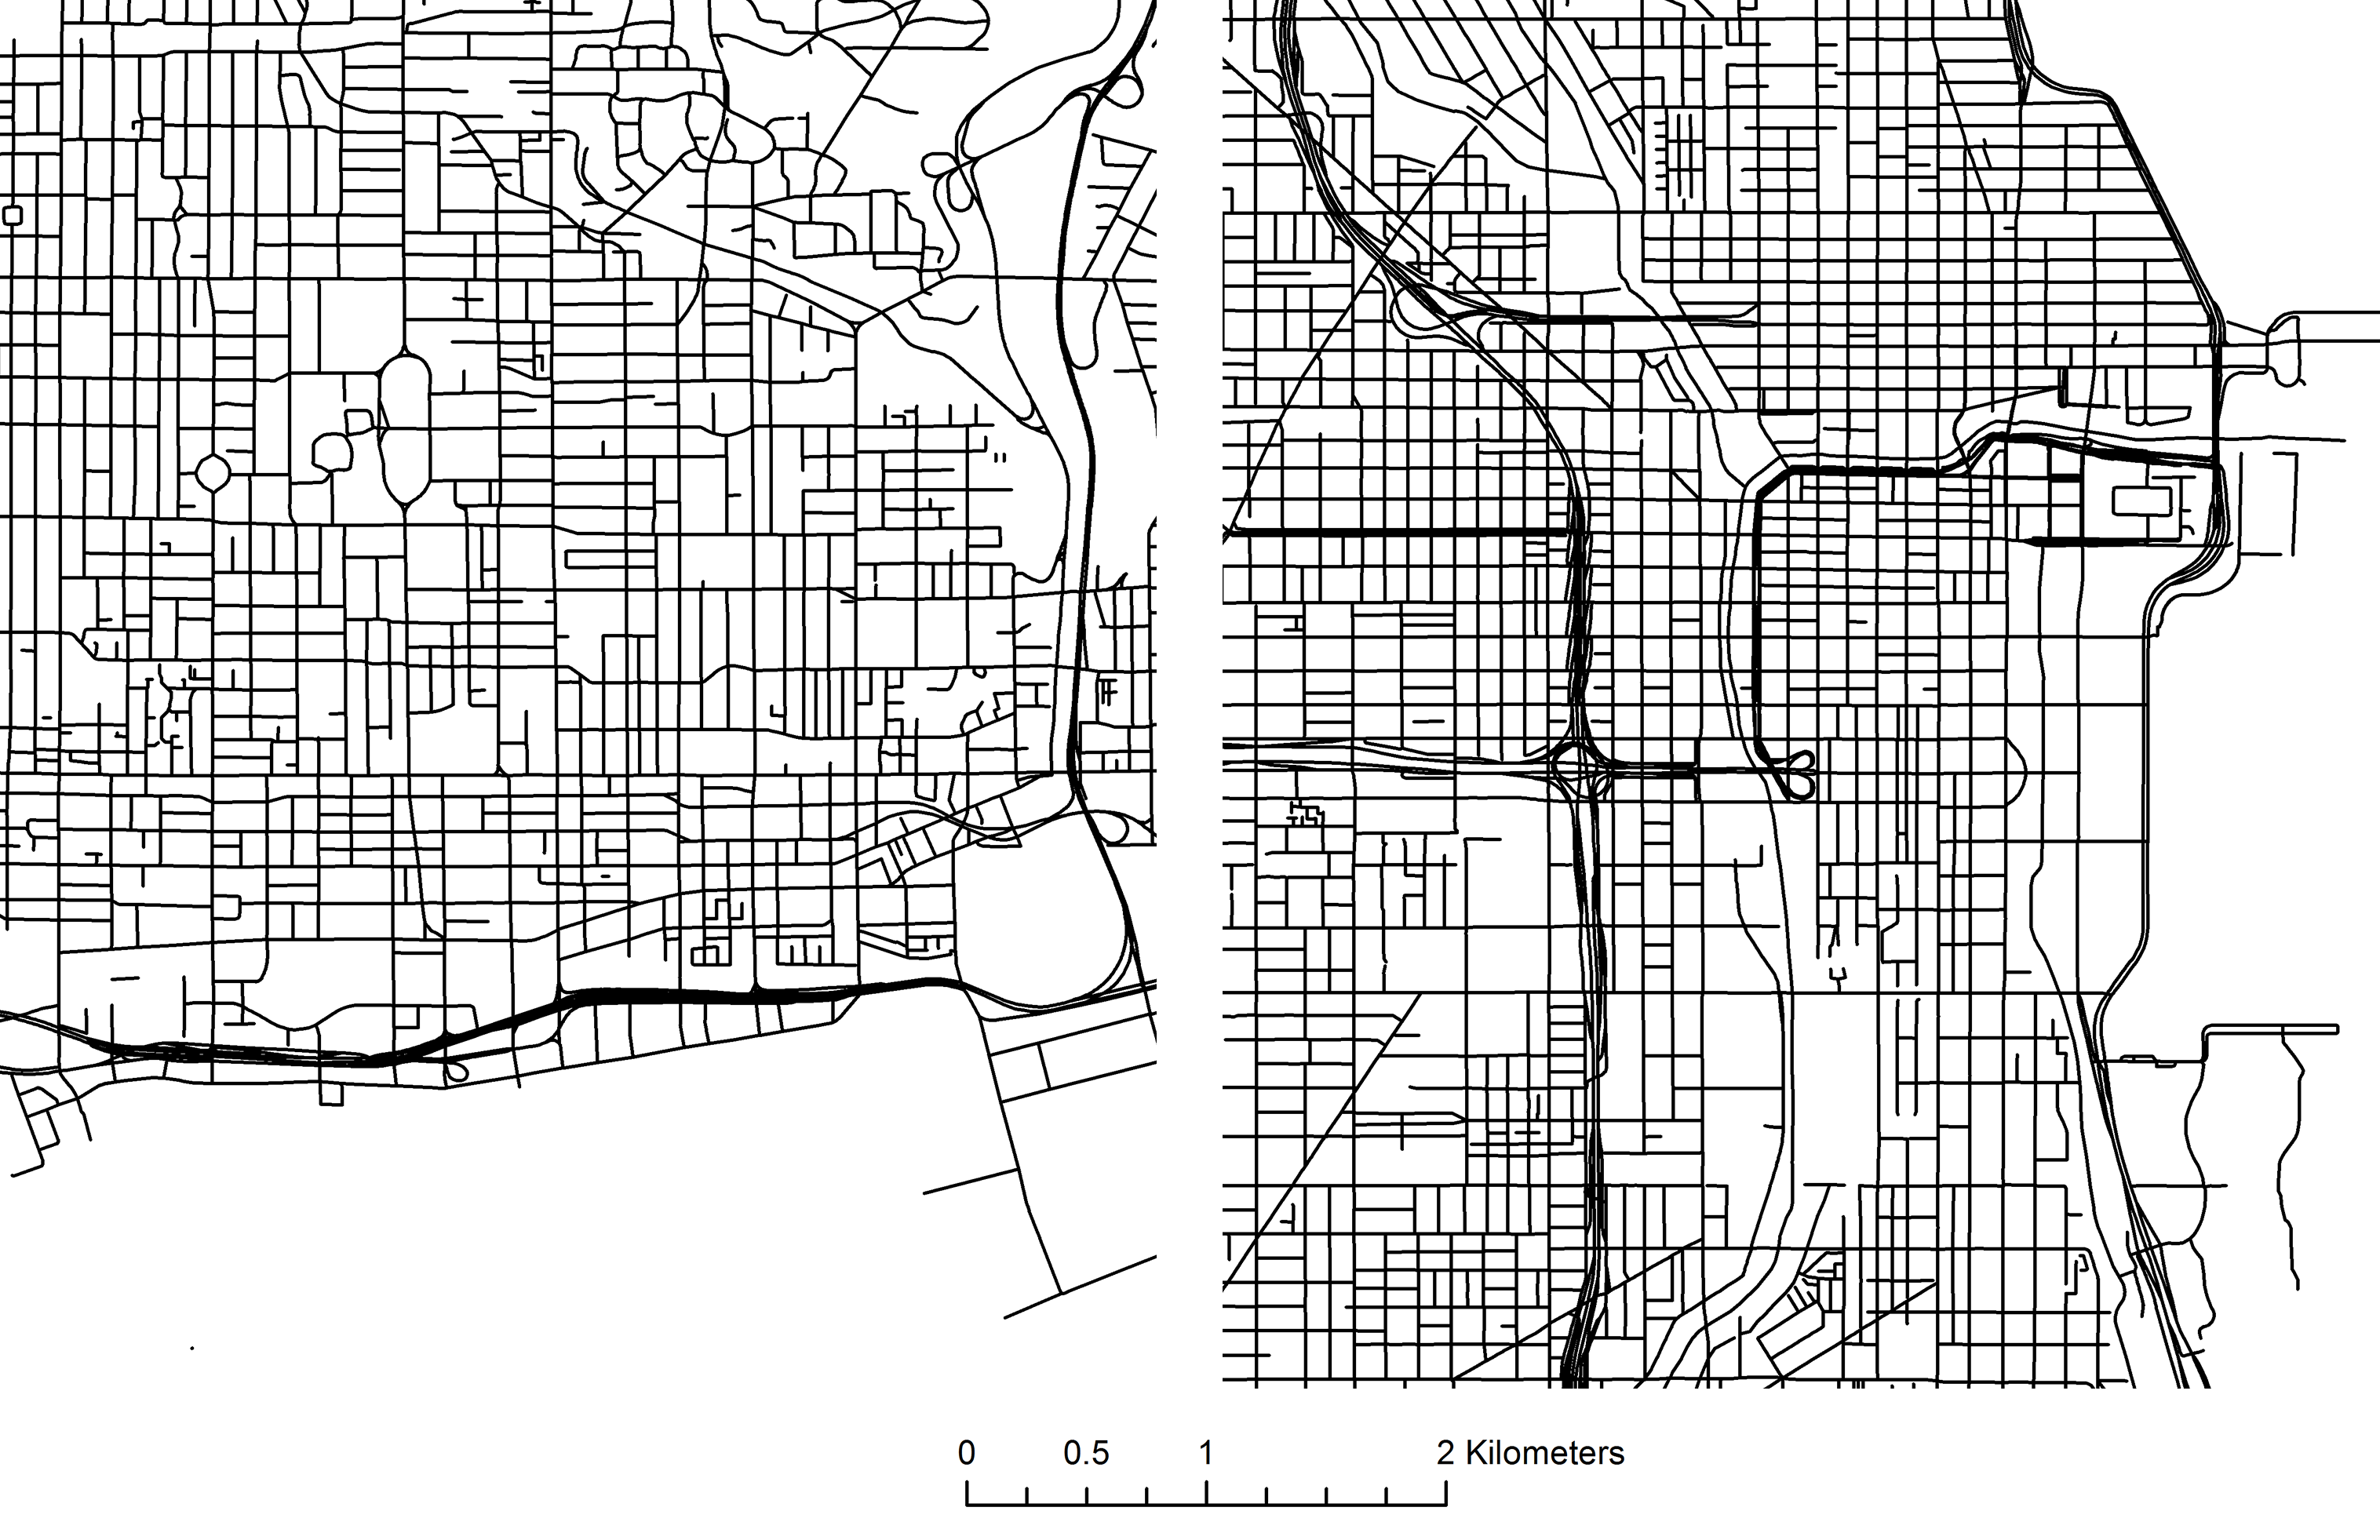 Quick Comparisons Between Torontos And Chicagos Street Grids